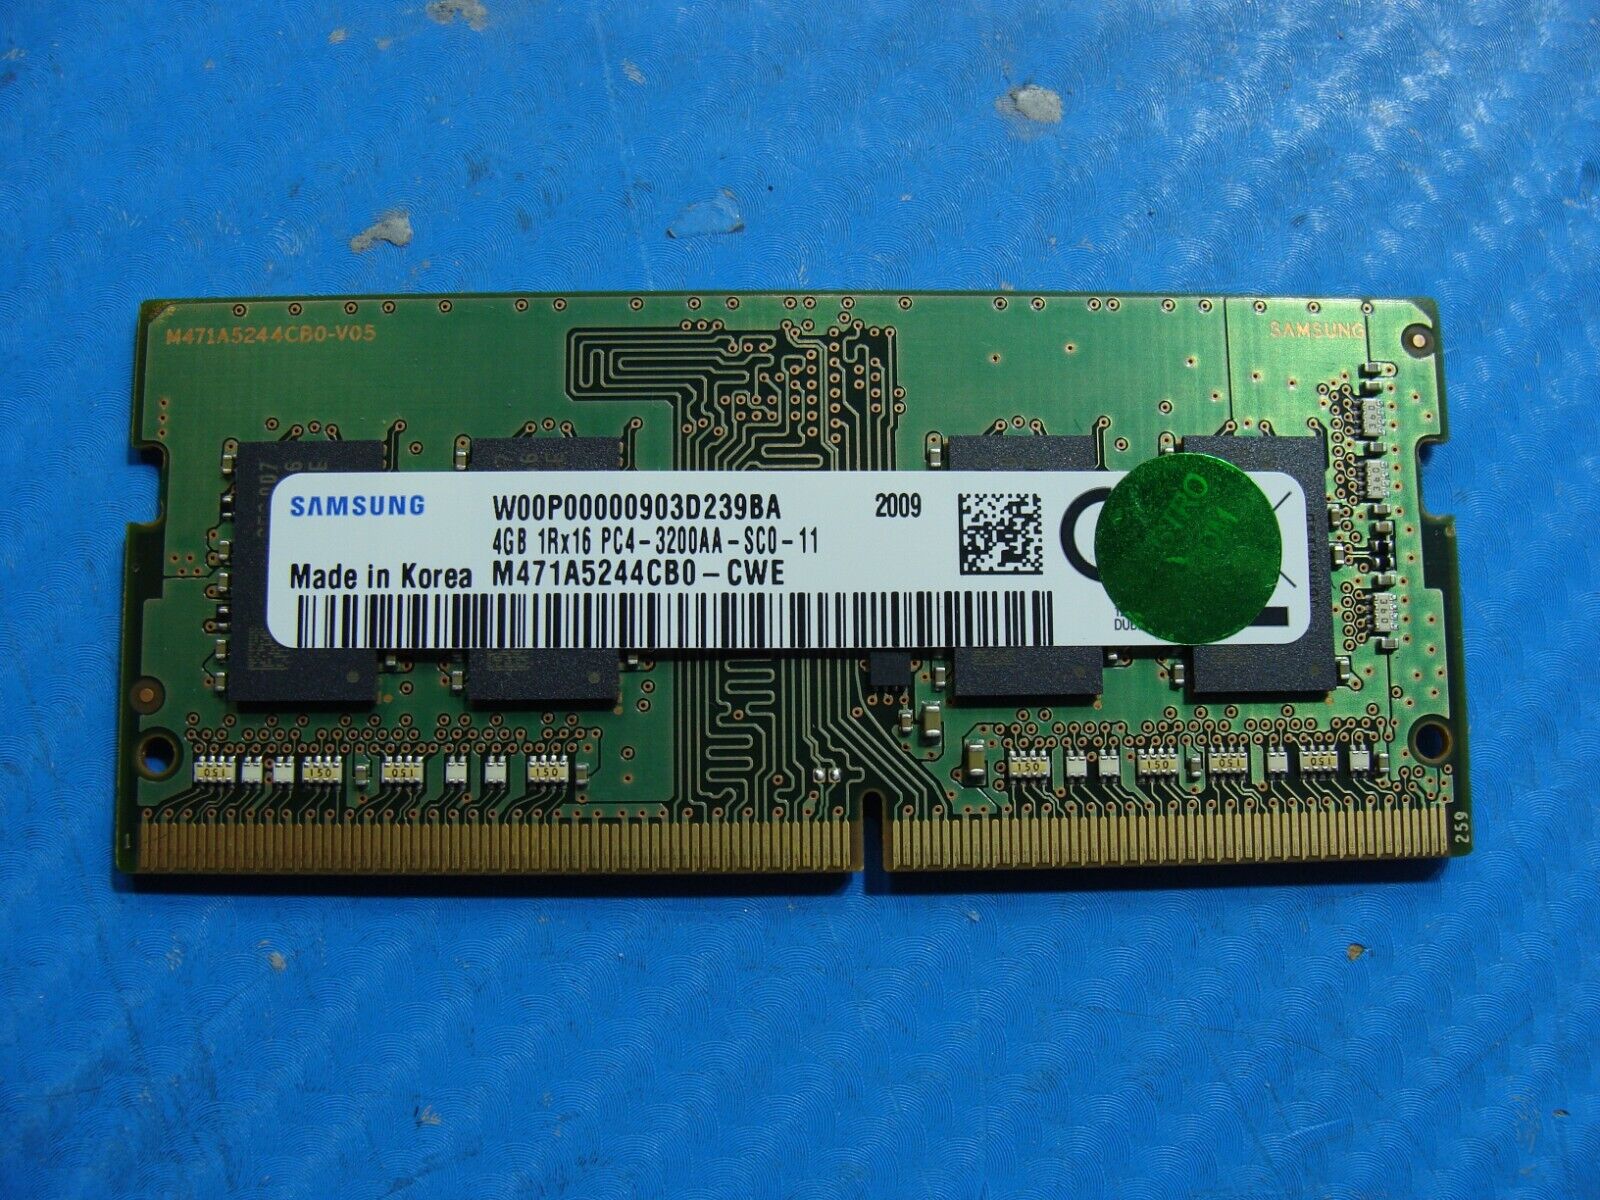 Dell 7500 2in1 Samsung 4GB 1Rx16 PC4-3200AA Memory RAM SO-DIMM M471A5244CB0-CWE